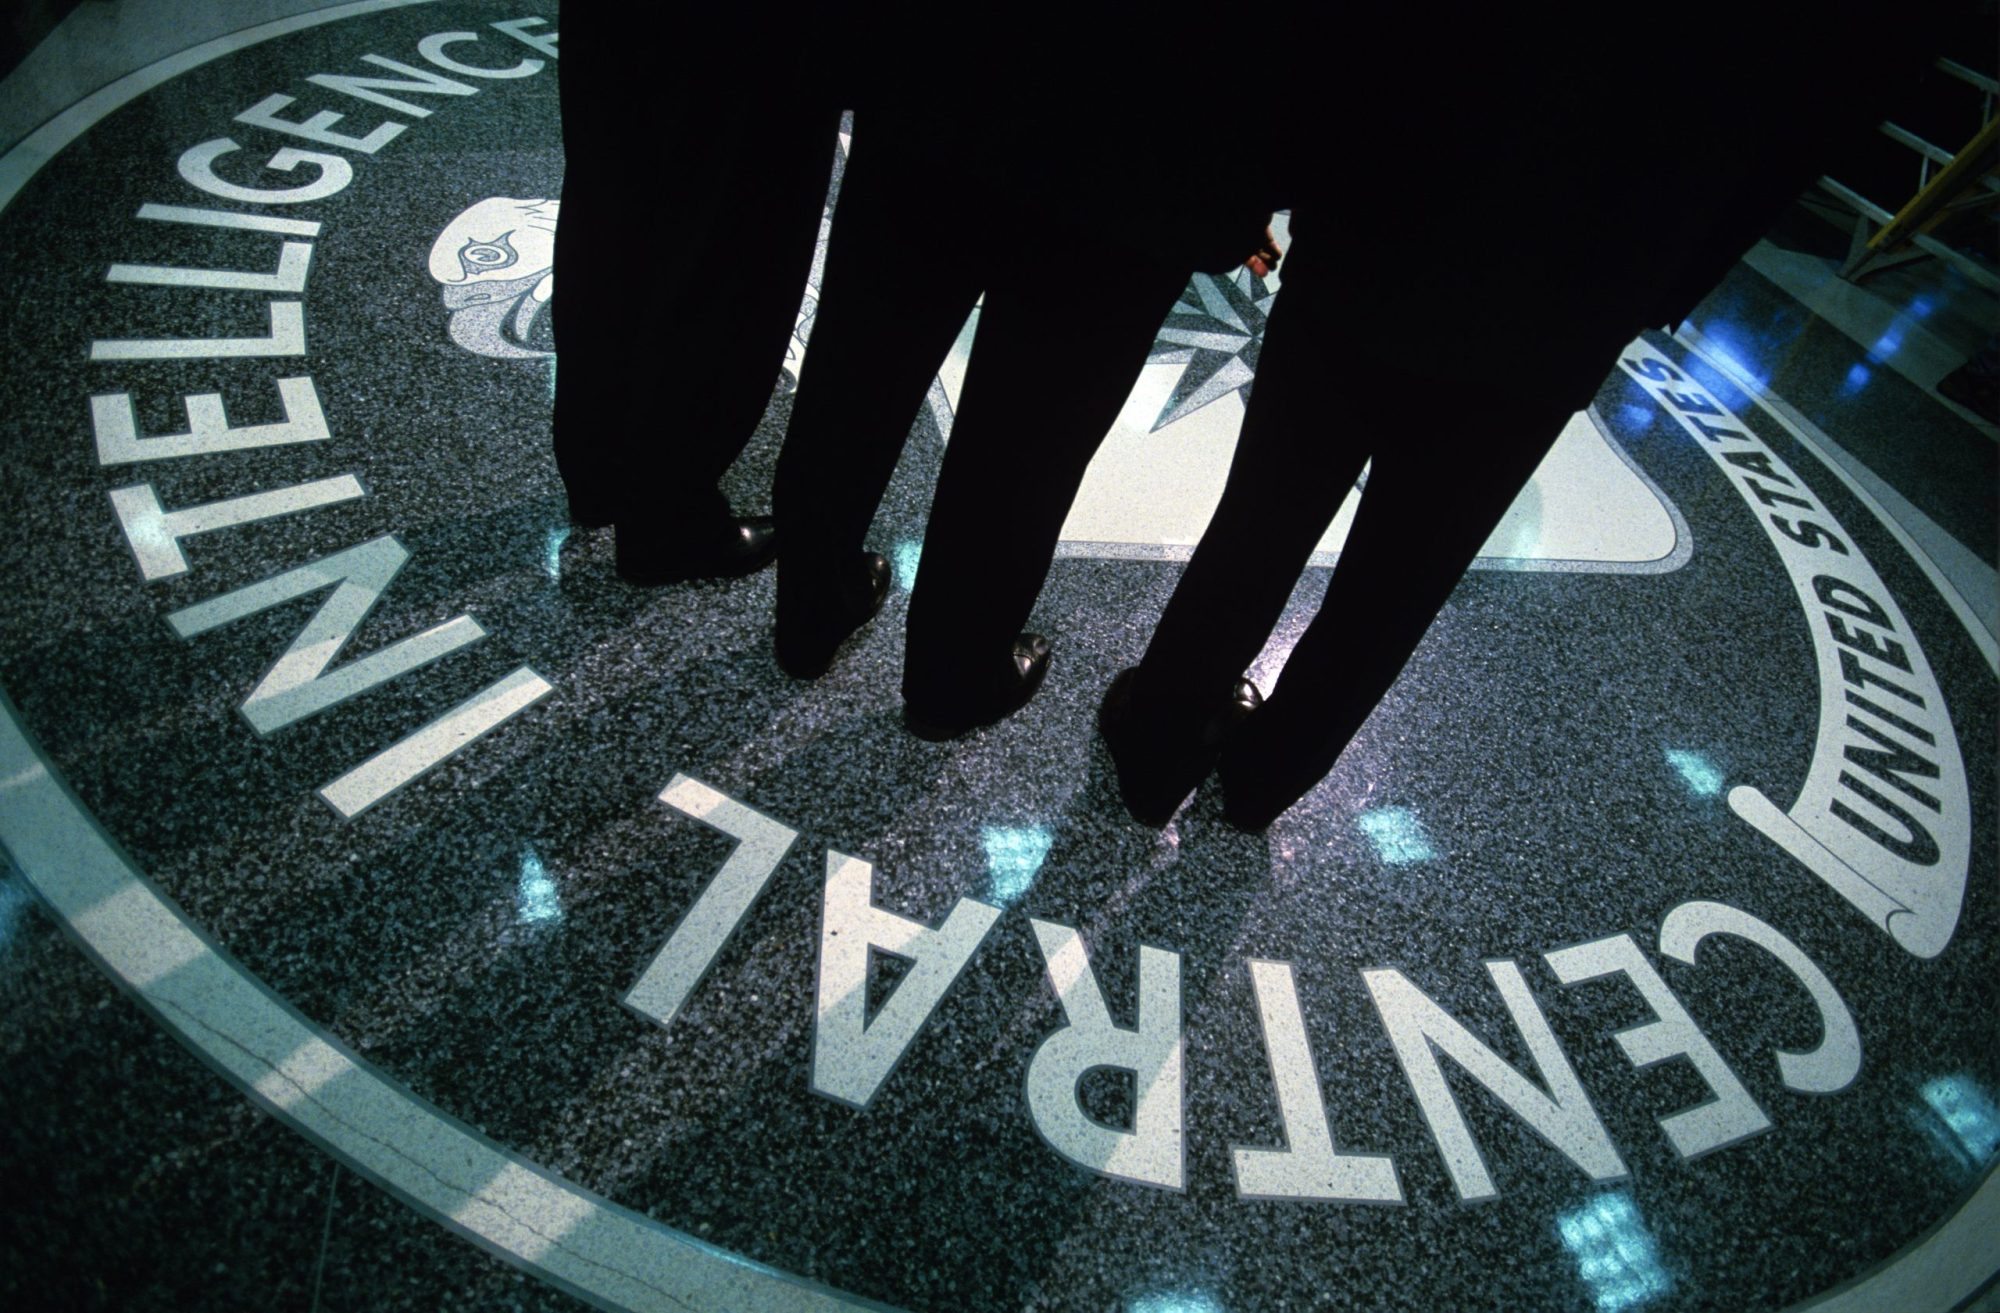 The CIA symbol is shown on the floor of CIA Headquarters, July 9, 2004 at CIA headquarters in Langley, Virginia.